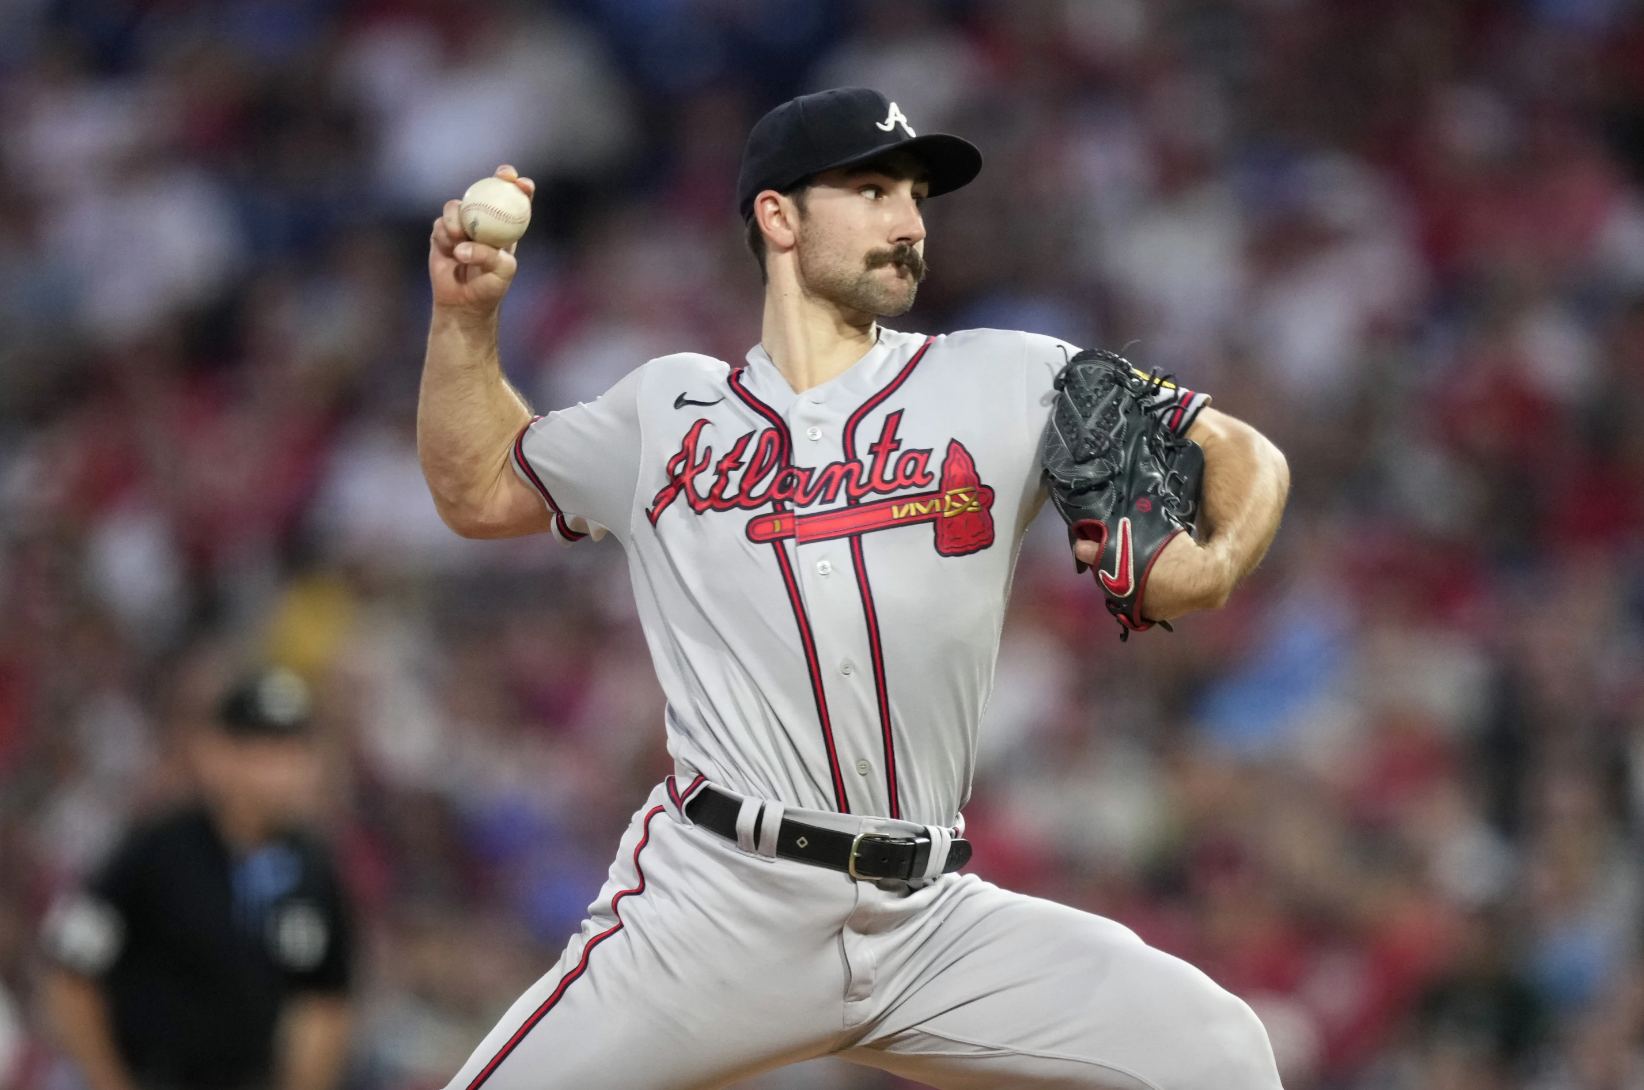 Braves beat Phillies to clinch 4th straight NL East title